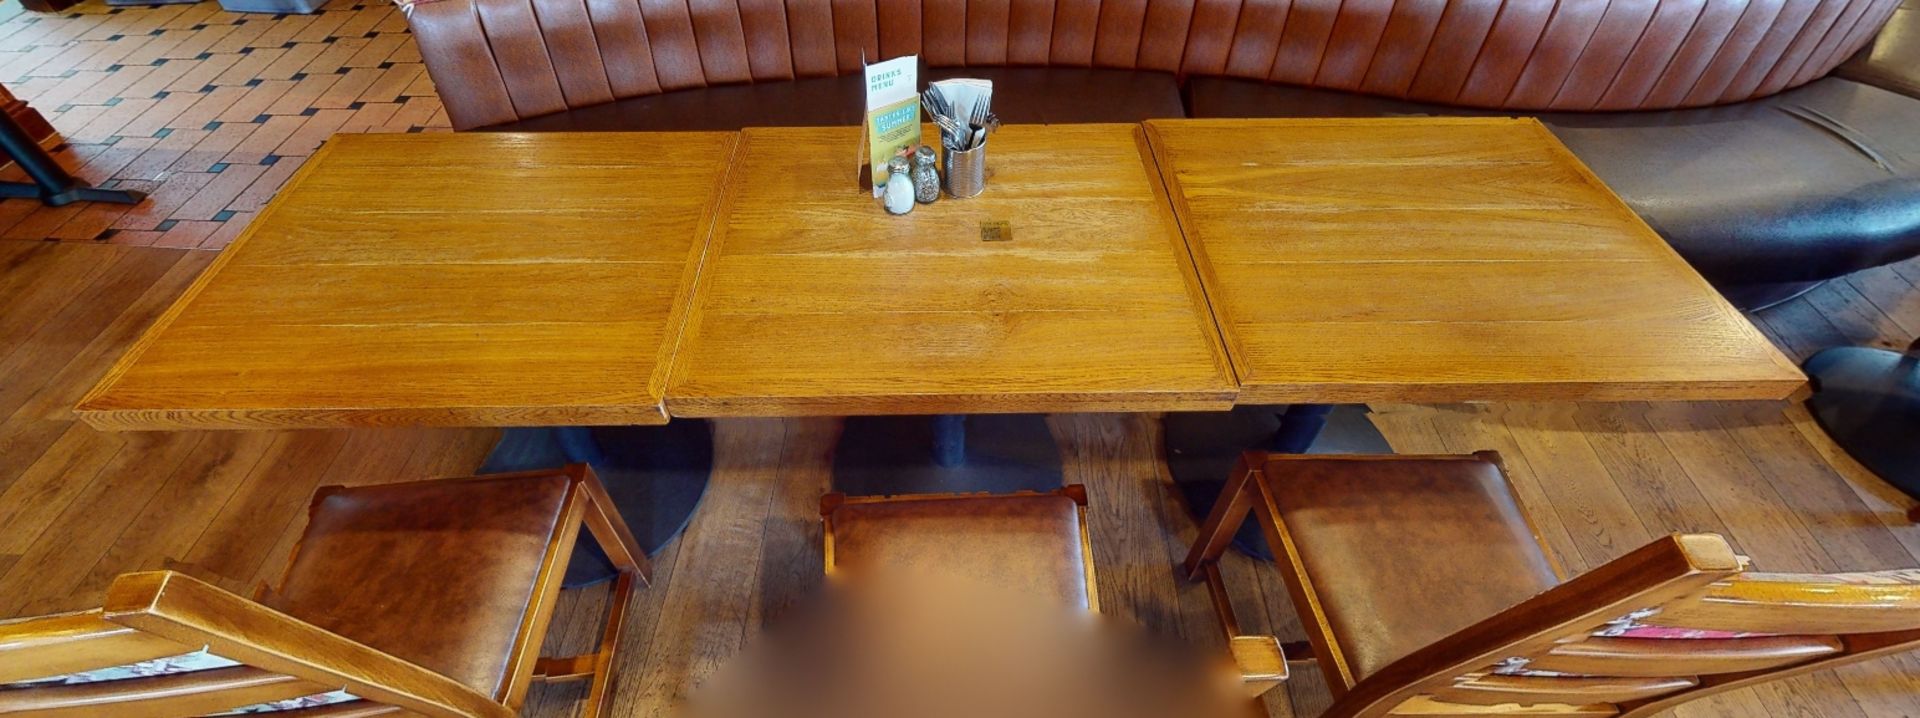 2 x Two Seater Restaurant Dining Tables With Cast Iron Bases and Wood Panelled Design Tops With - Image 4 of 6